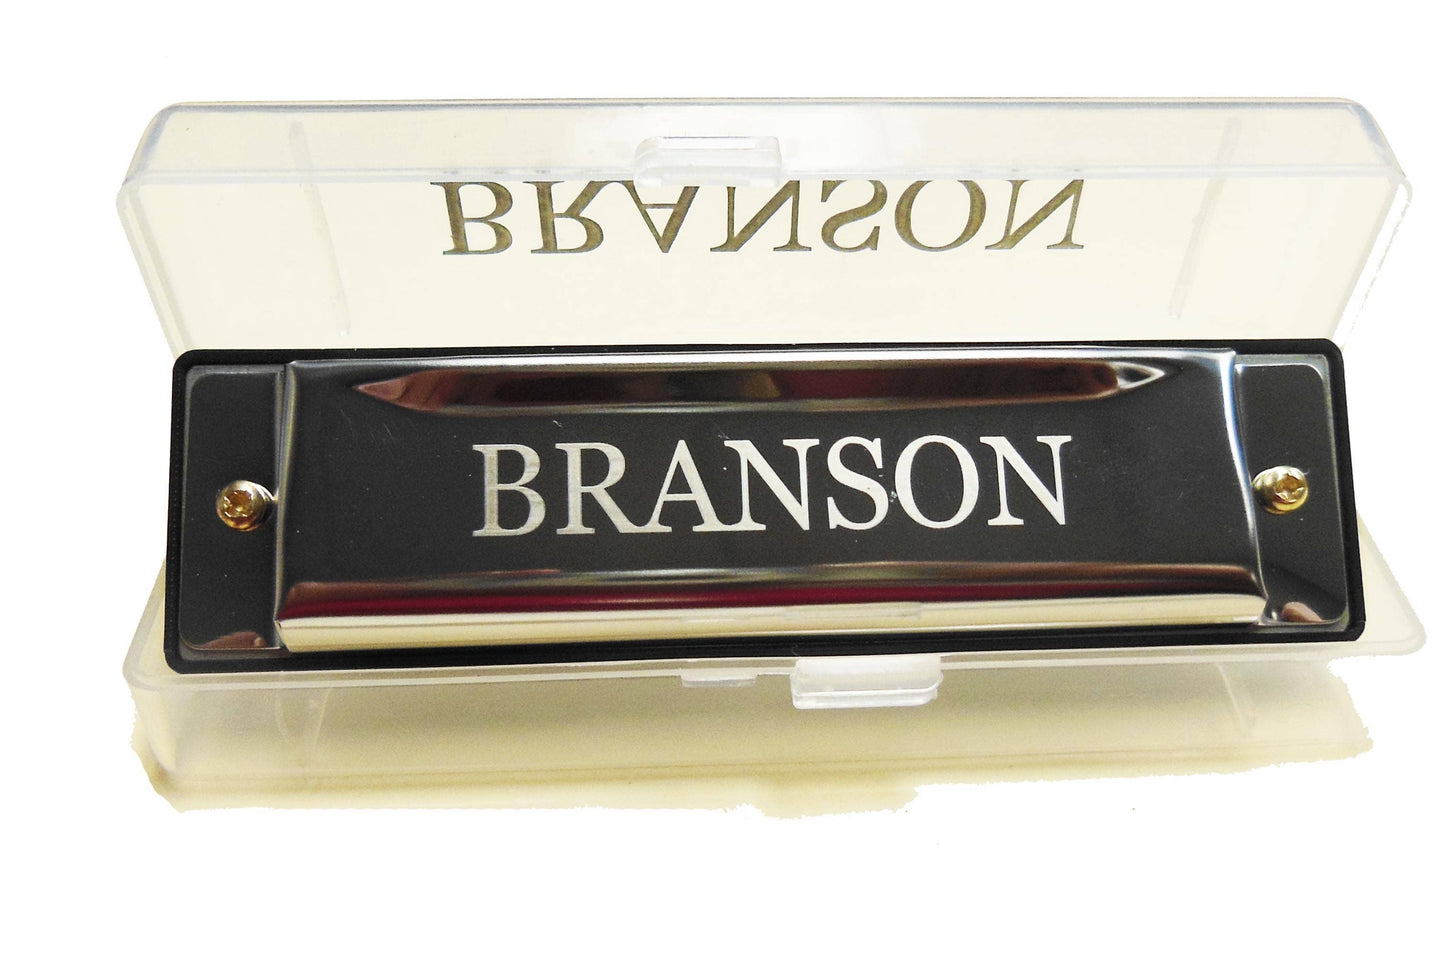 MID-SOUTH PRODUCTS - Branson Harmonica